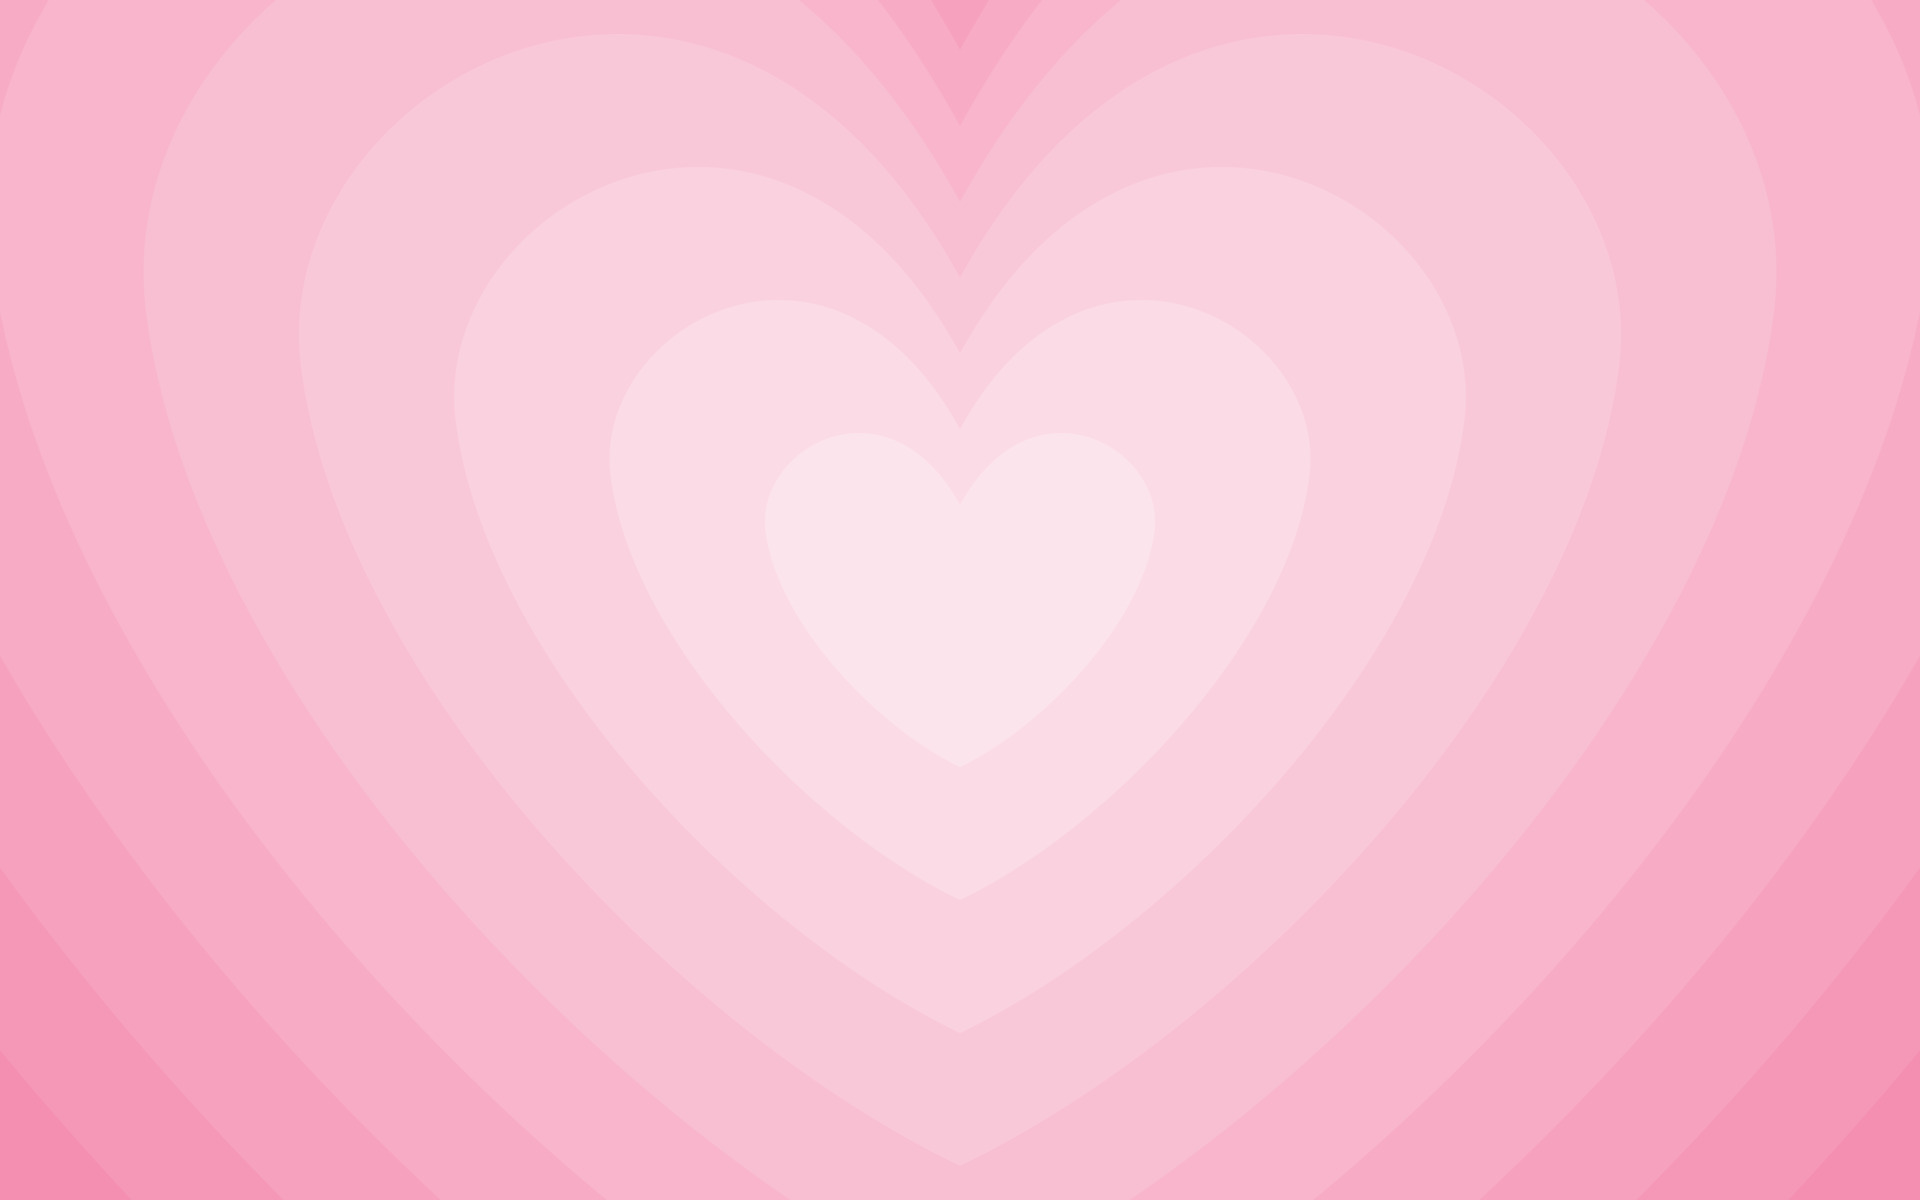 Tunnel of Concentric hearts. Romantic cute background. Pink aesthetic hearts backdrop. Vector illustration